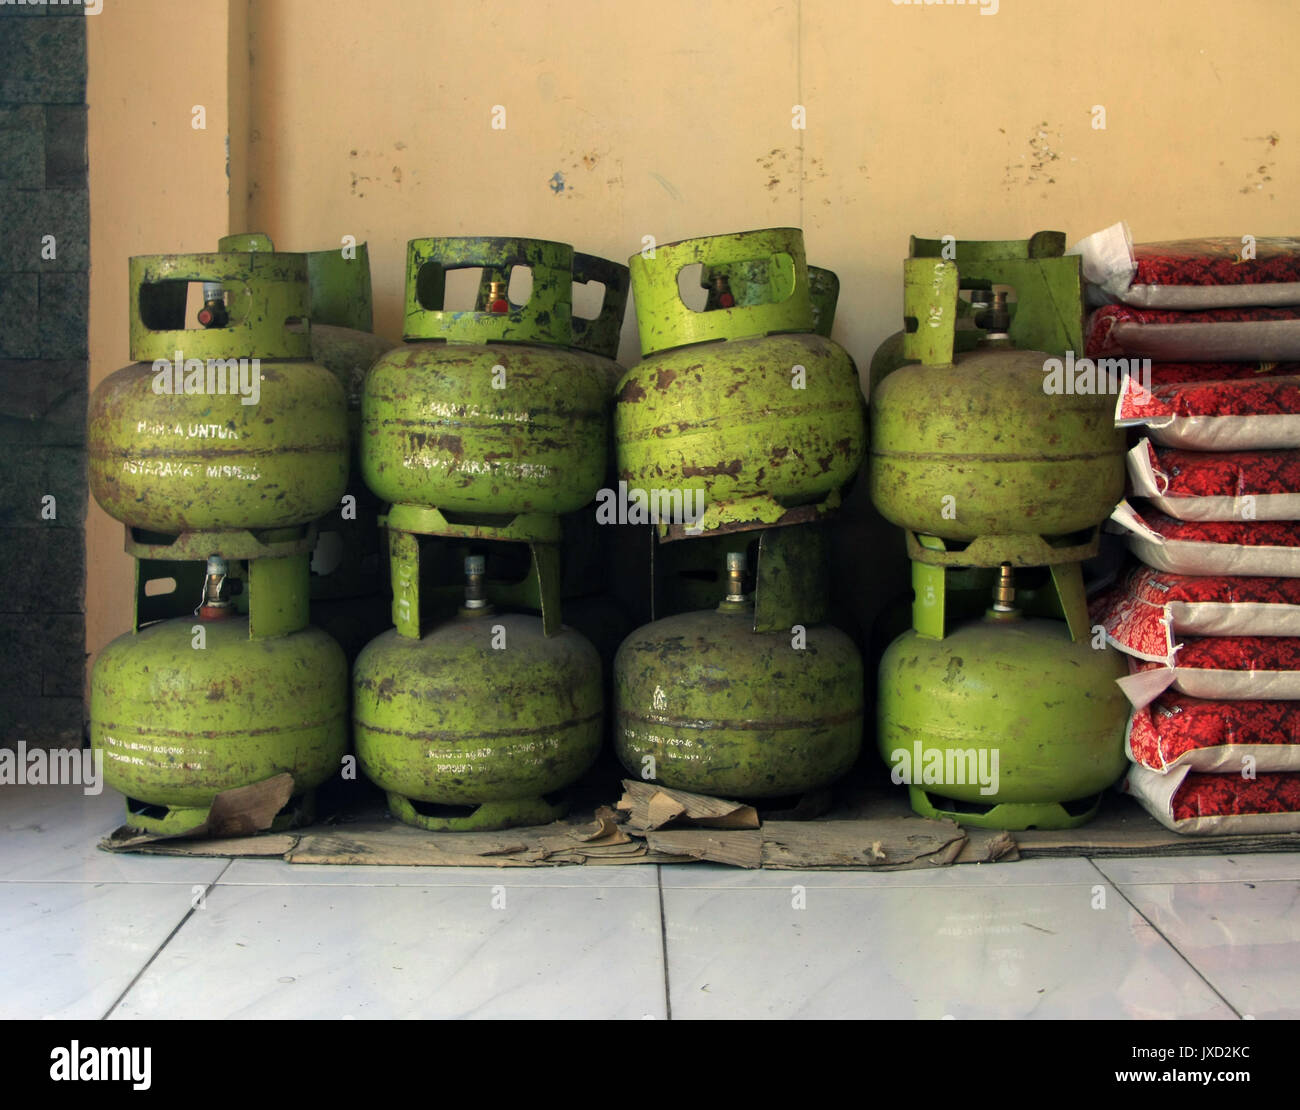 Stack of LPG Propane gas bottles in a shop - Bali, Indonesia Stock Photo